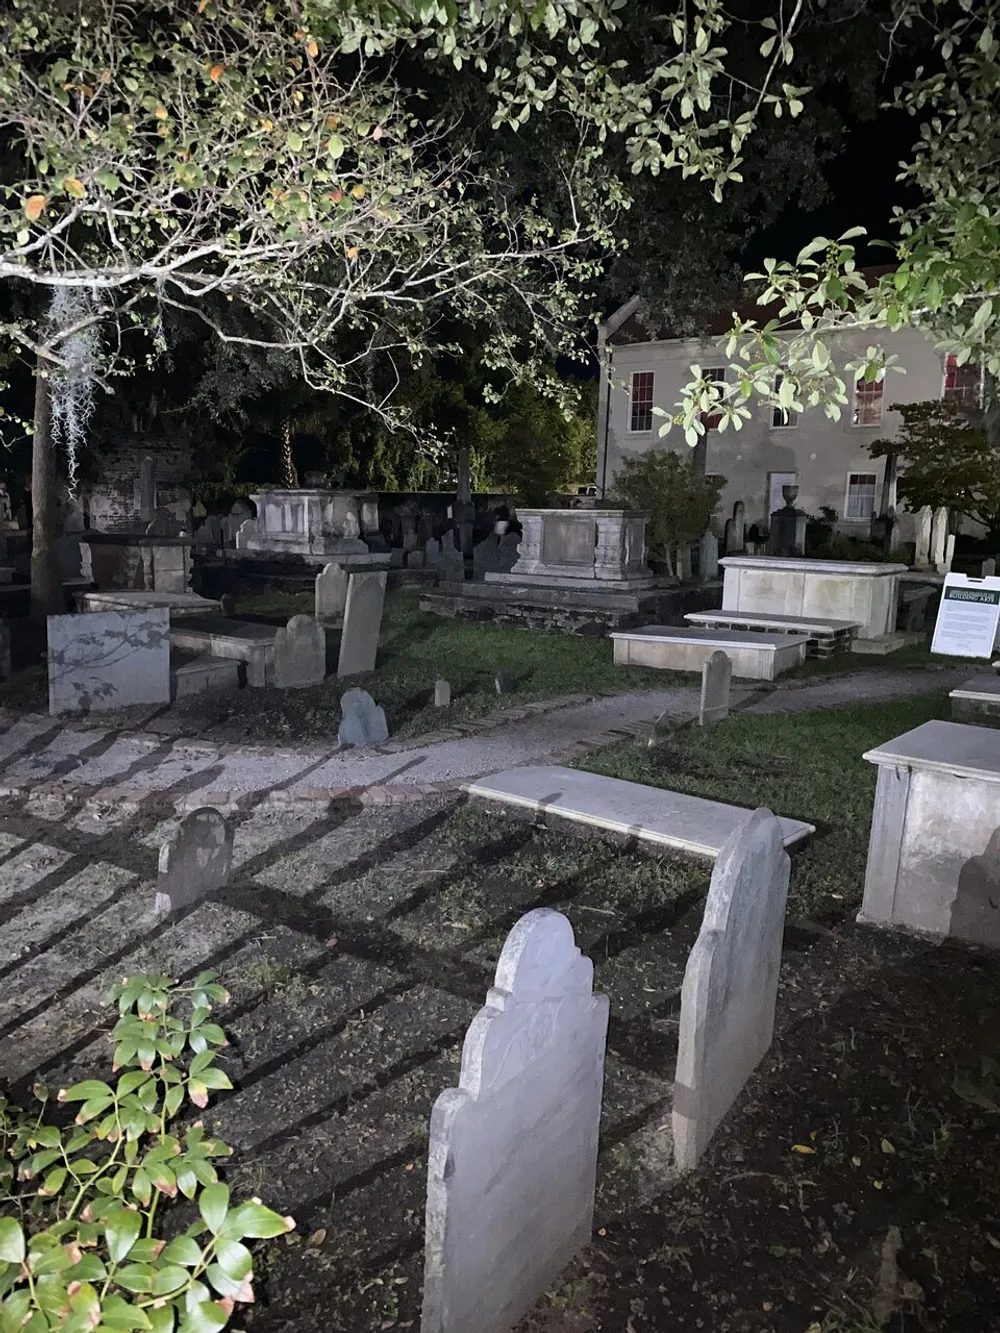 The image depicts a nighttime scene of an old spooky cemetery with various tombstones and crypts illuminated by artificial light